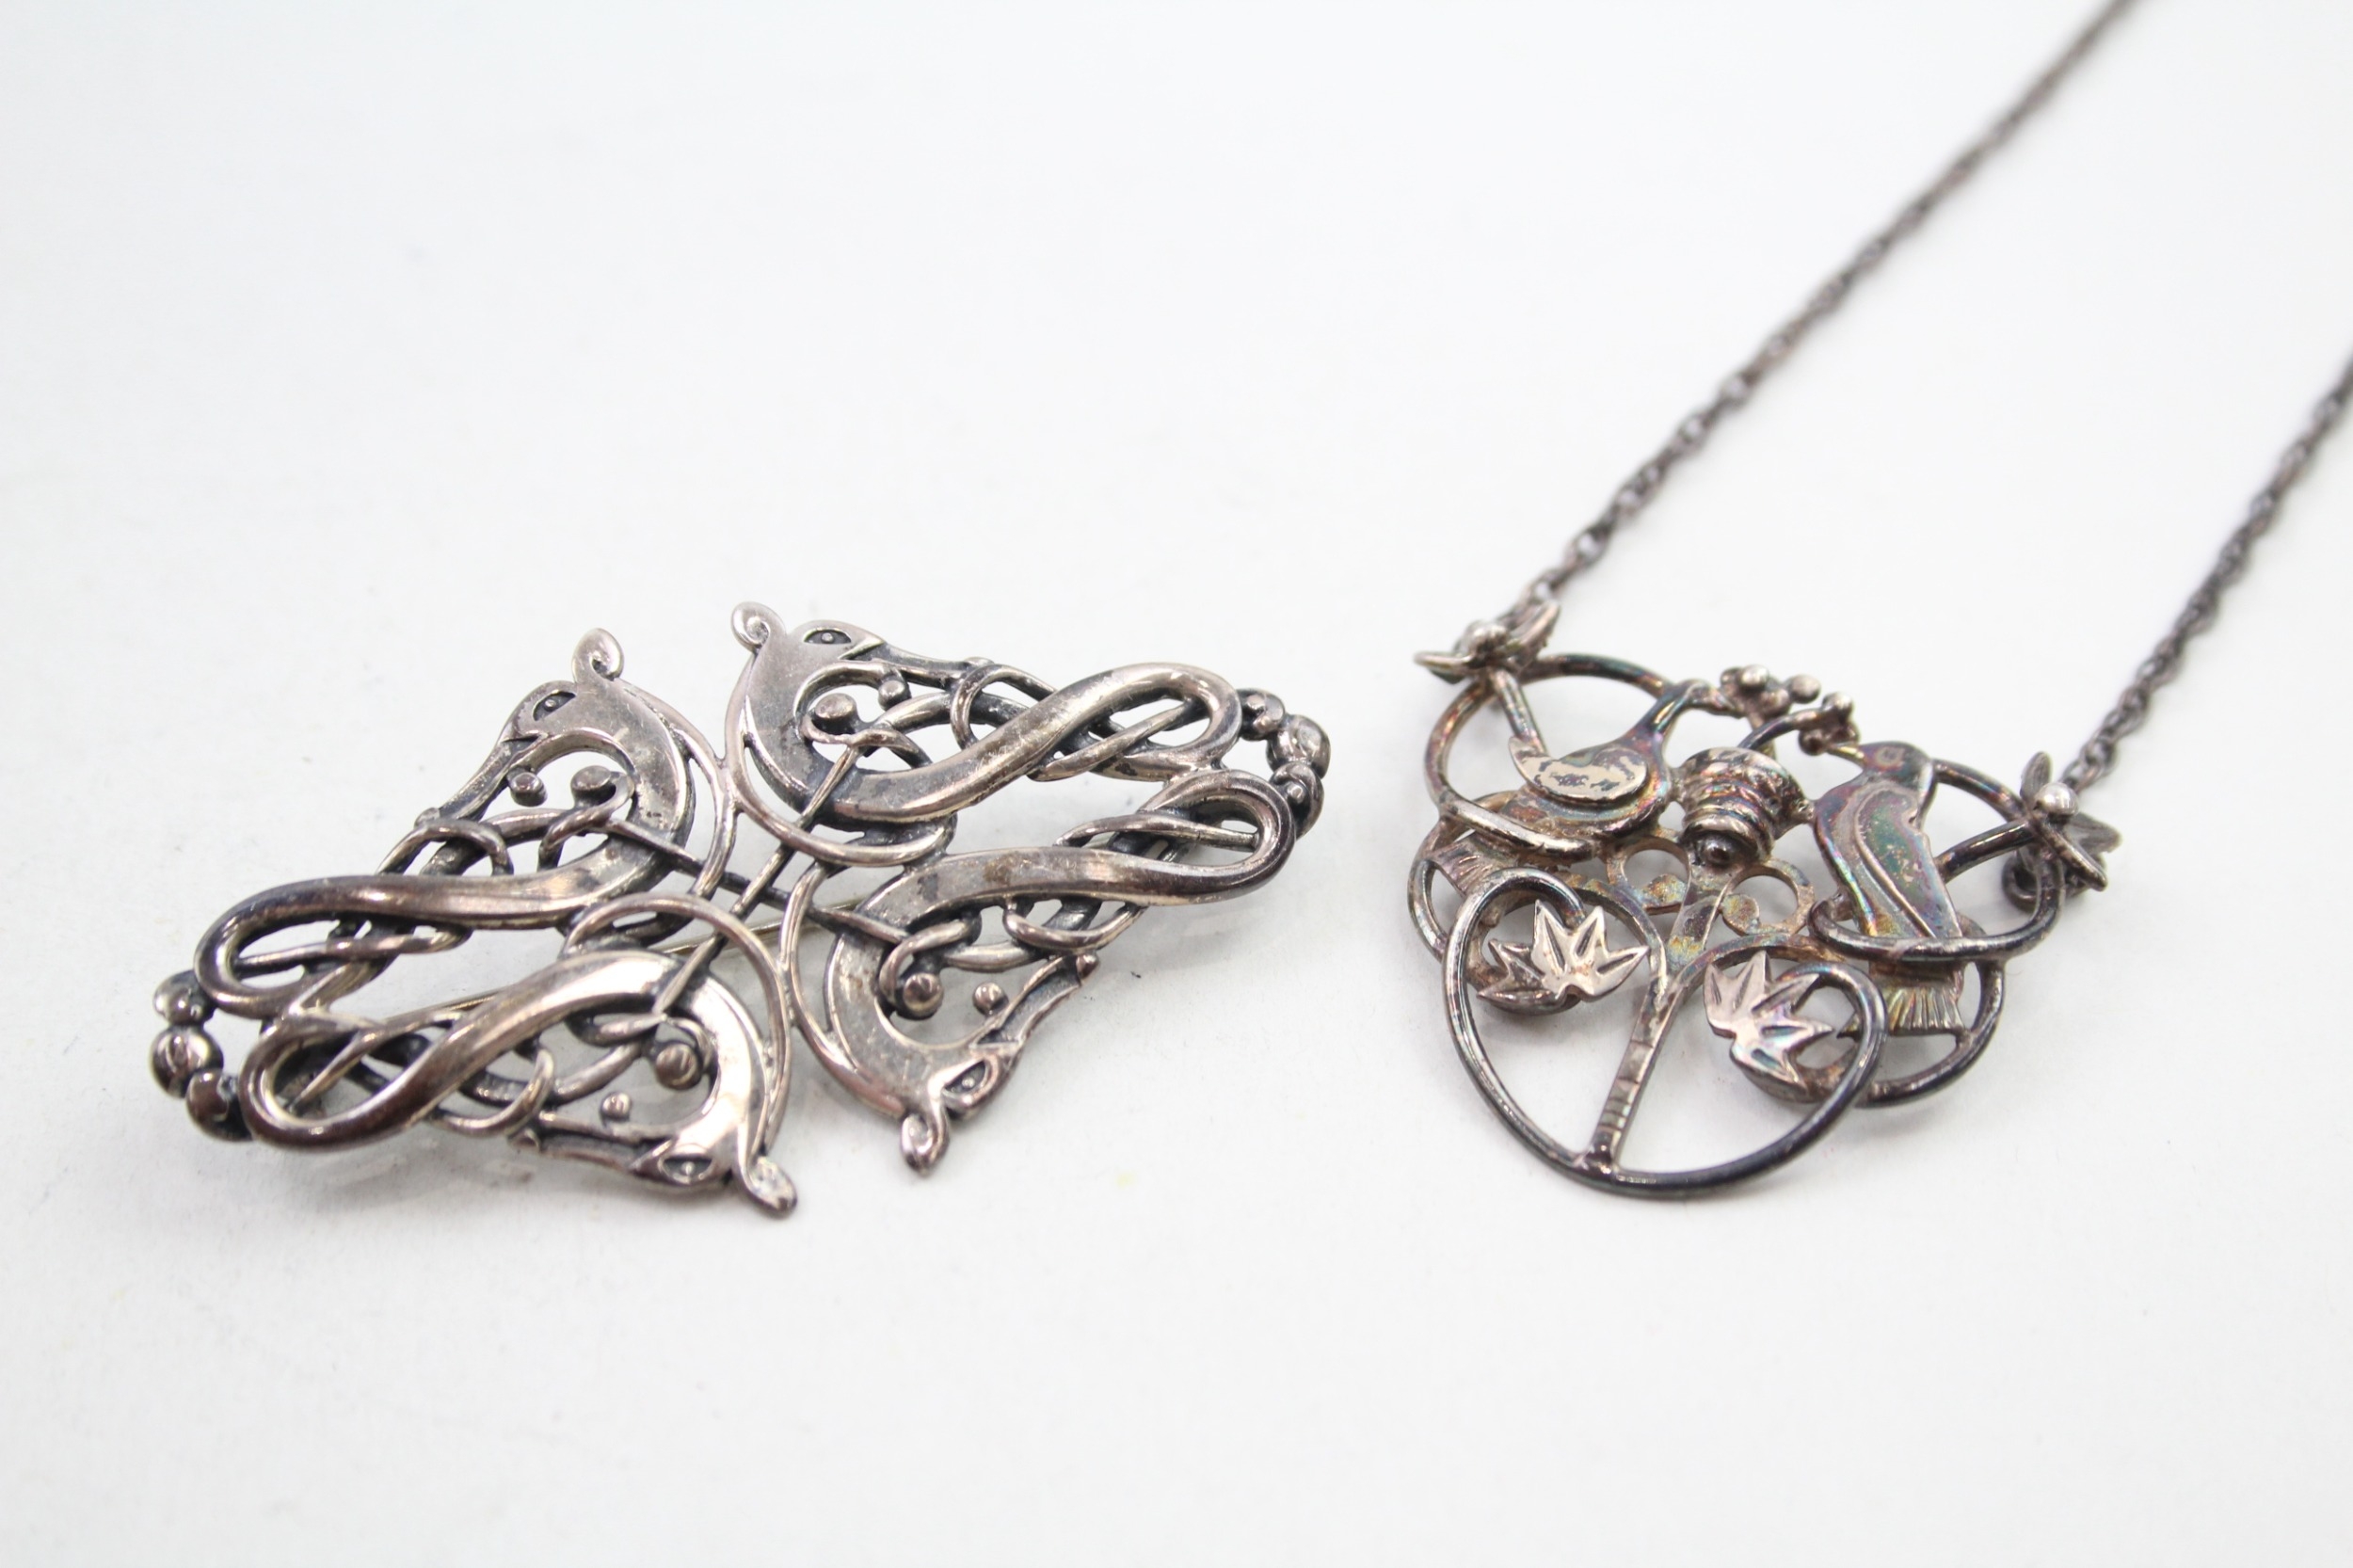 A silver necklace and brooch by Scottish silversmith Ola Gorie (19g)